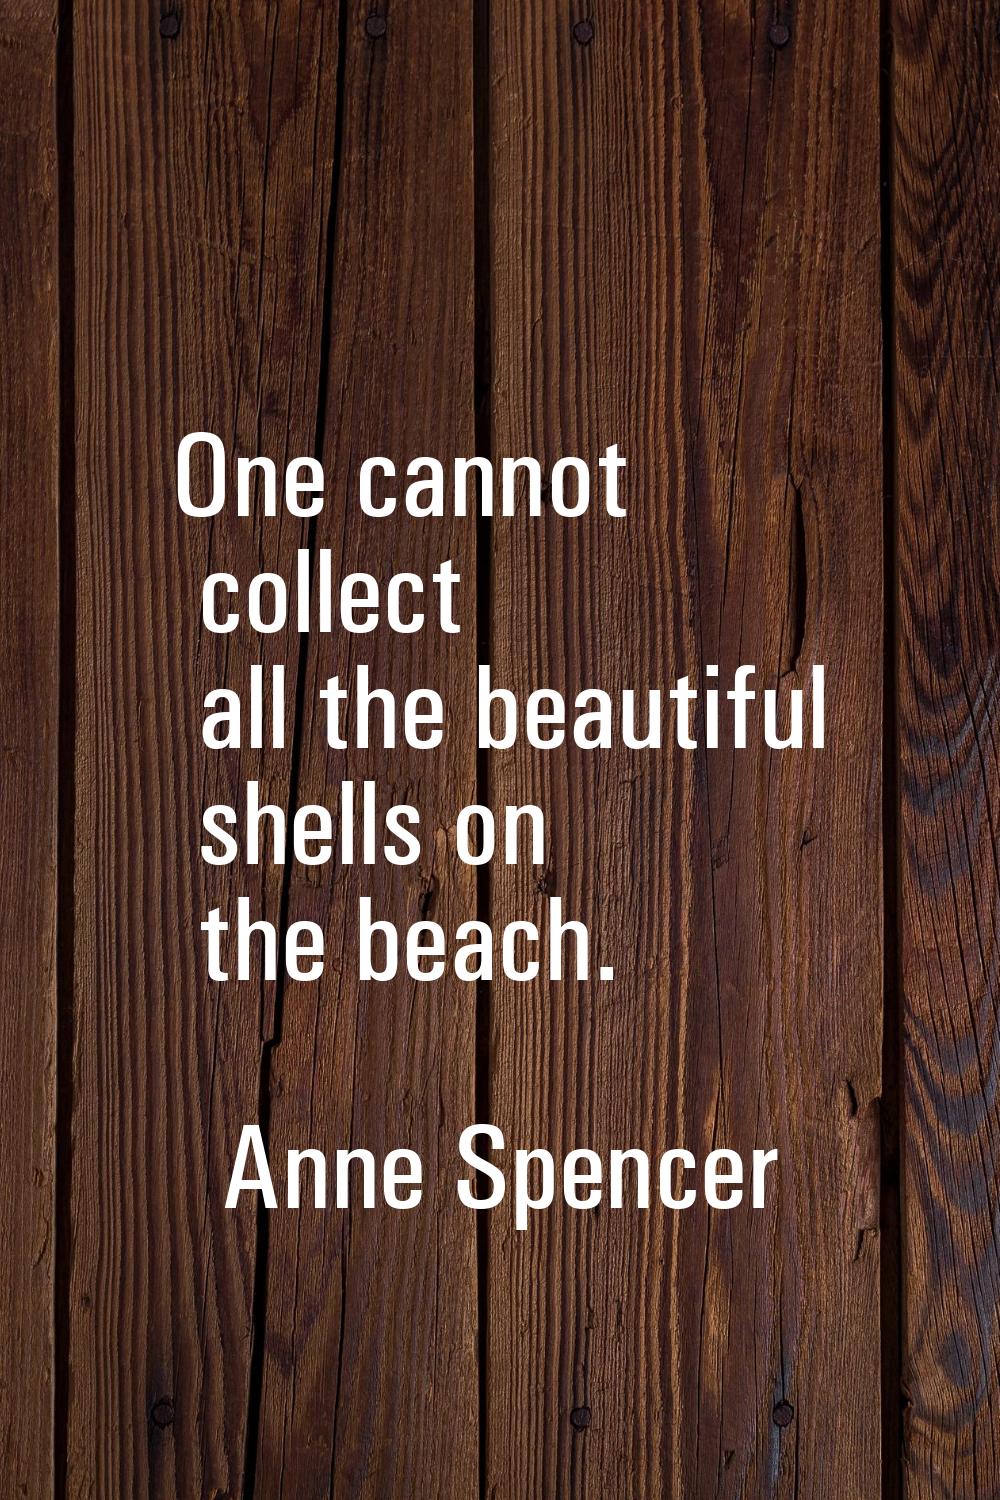 One cannot collect all the beautiful shells on the beach.